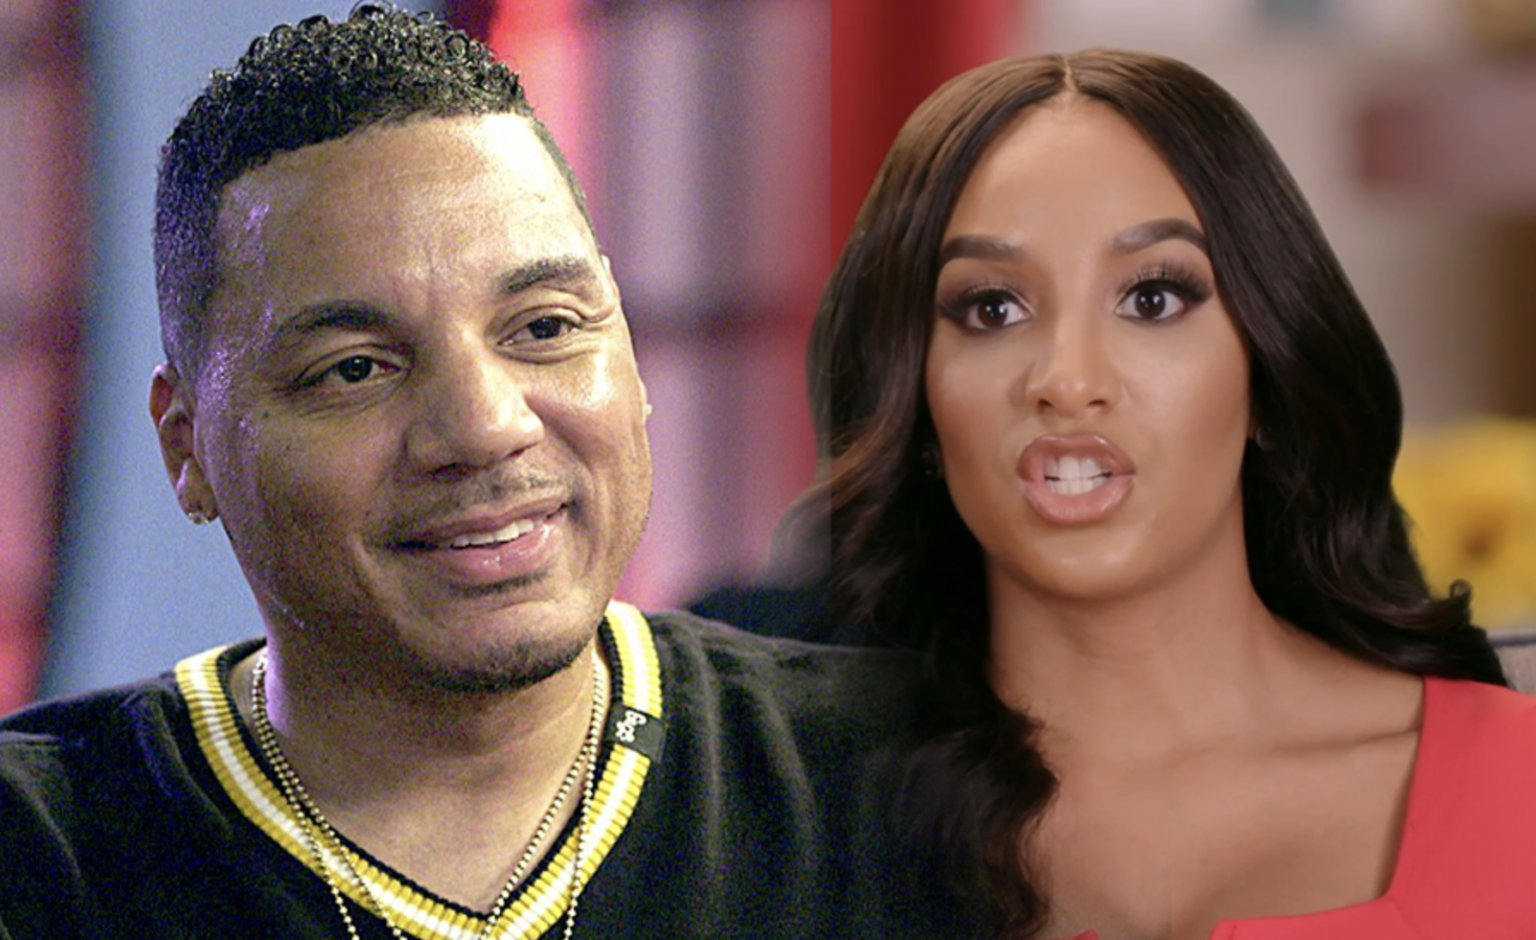 Love & Hip Hop Rich Dollaz Reportedly Dating Chantel Everette From The Family Chantel!